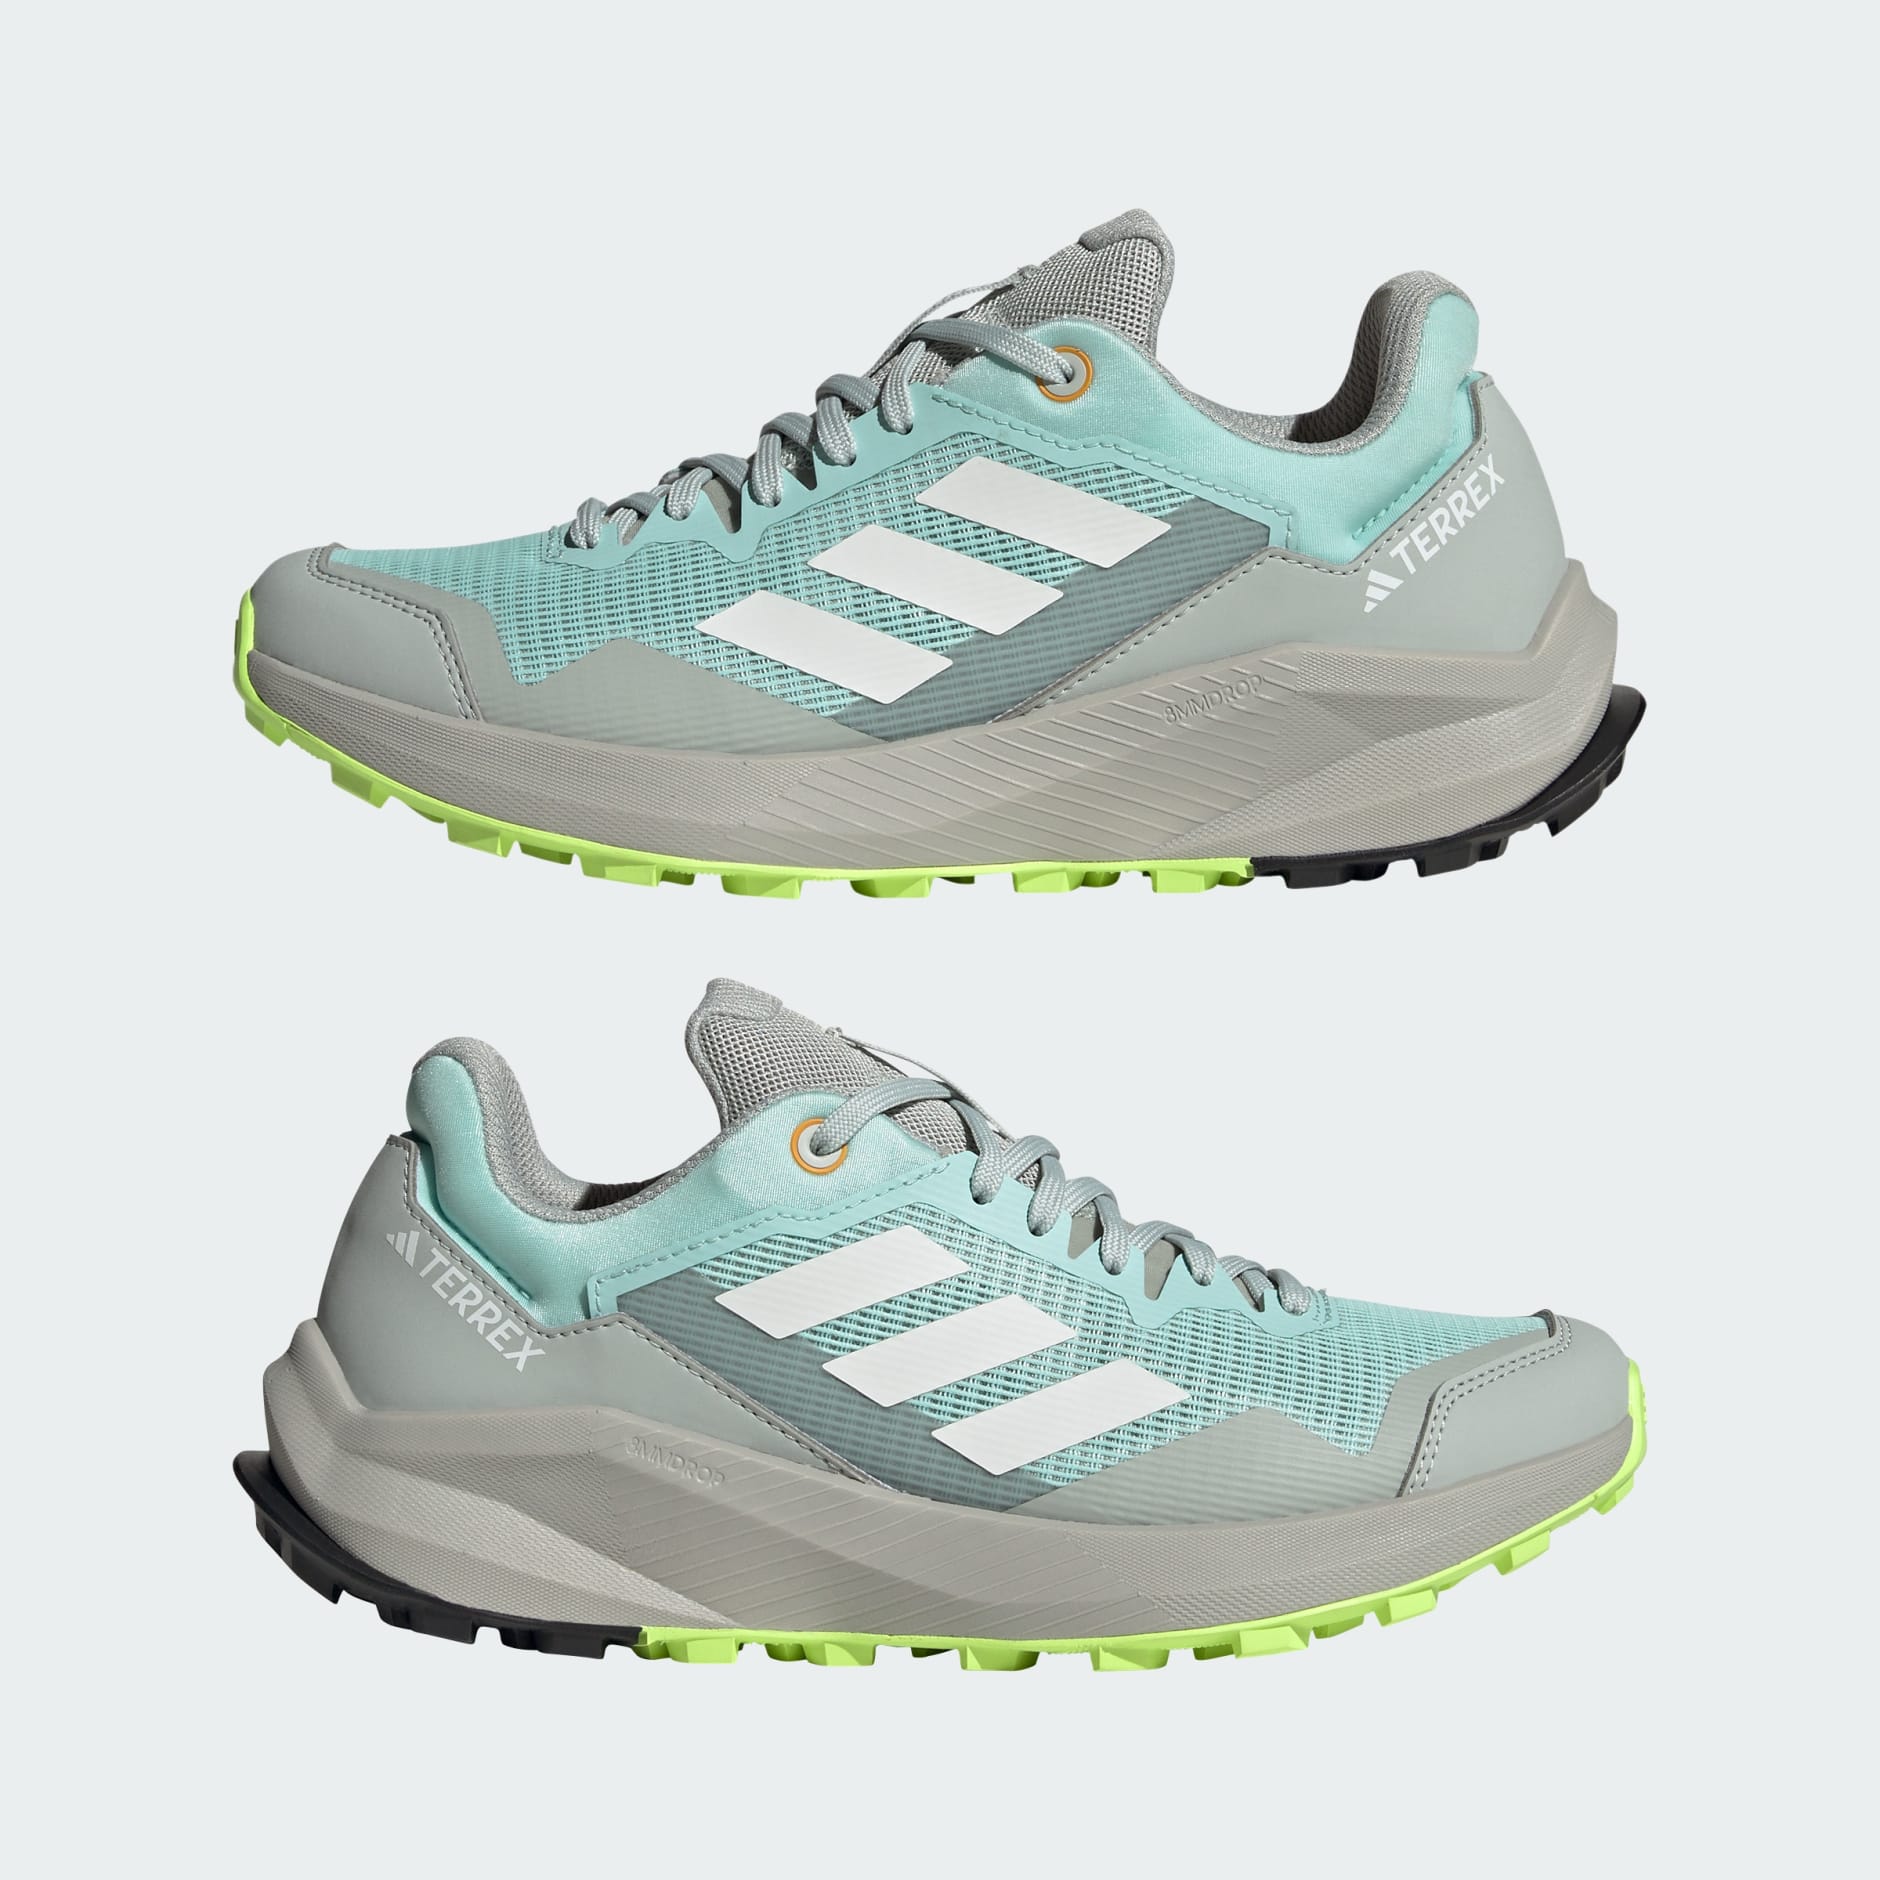 Shoes - Terrex Trail Rider Trail Running Shoes - Turquoise | adidas ...